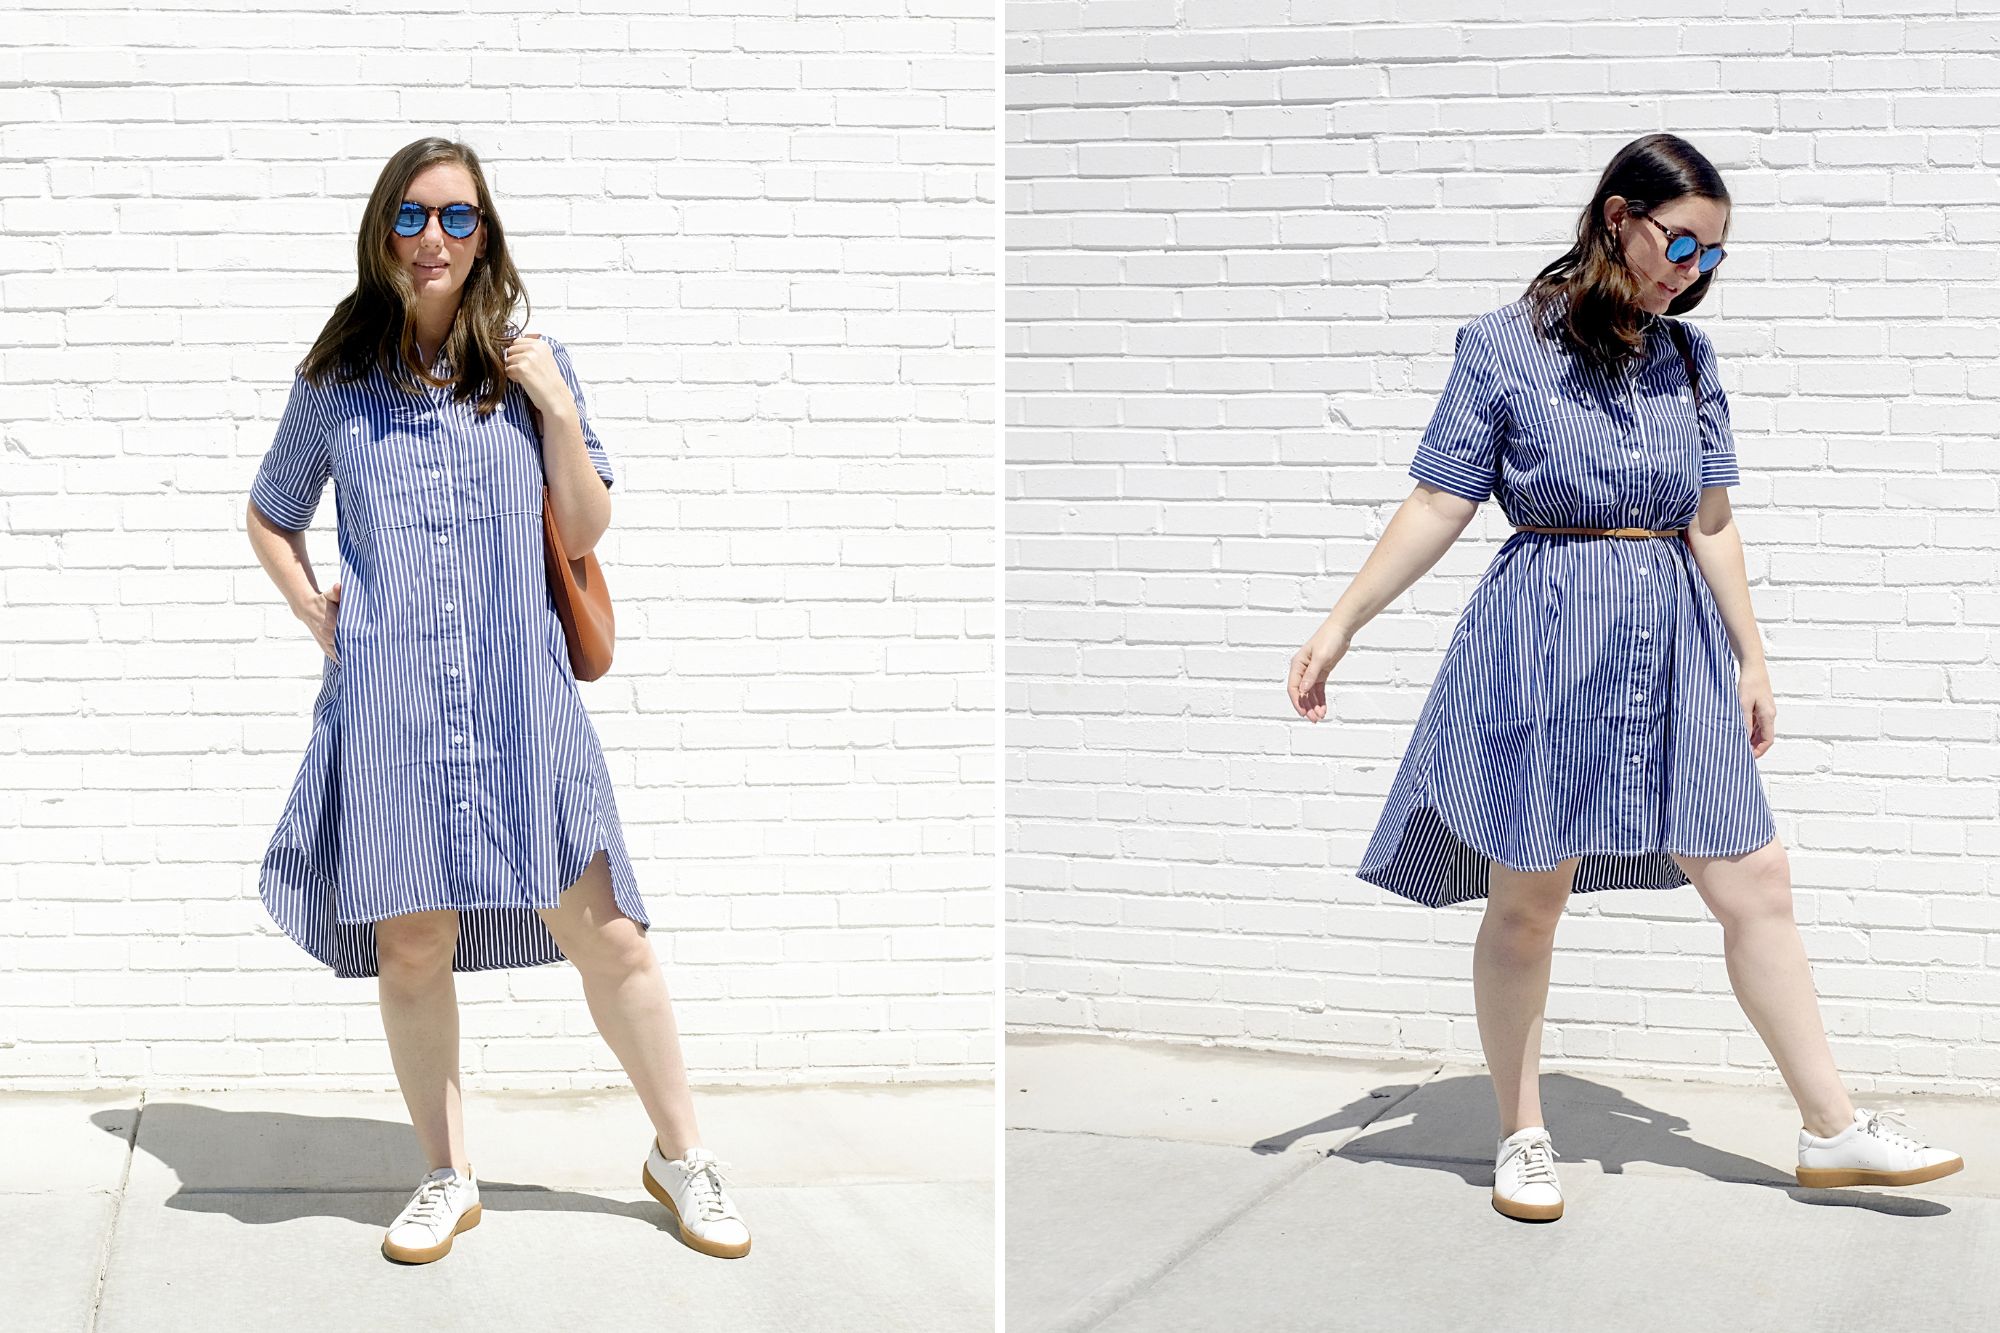 Alyssa wears the Daytripper Shirtdress with and without a belt